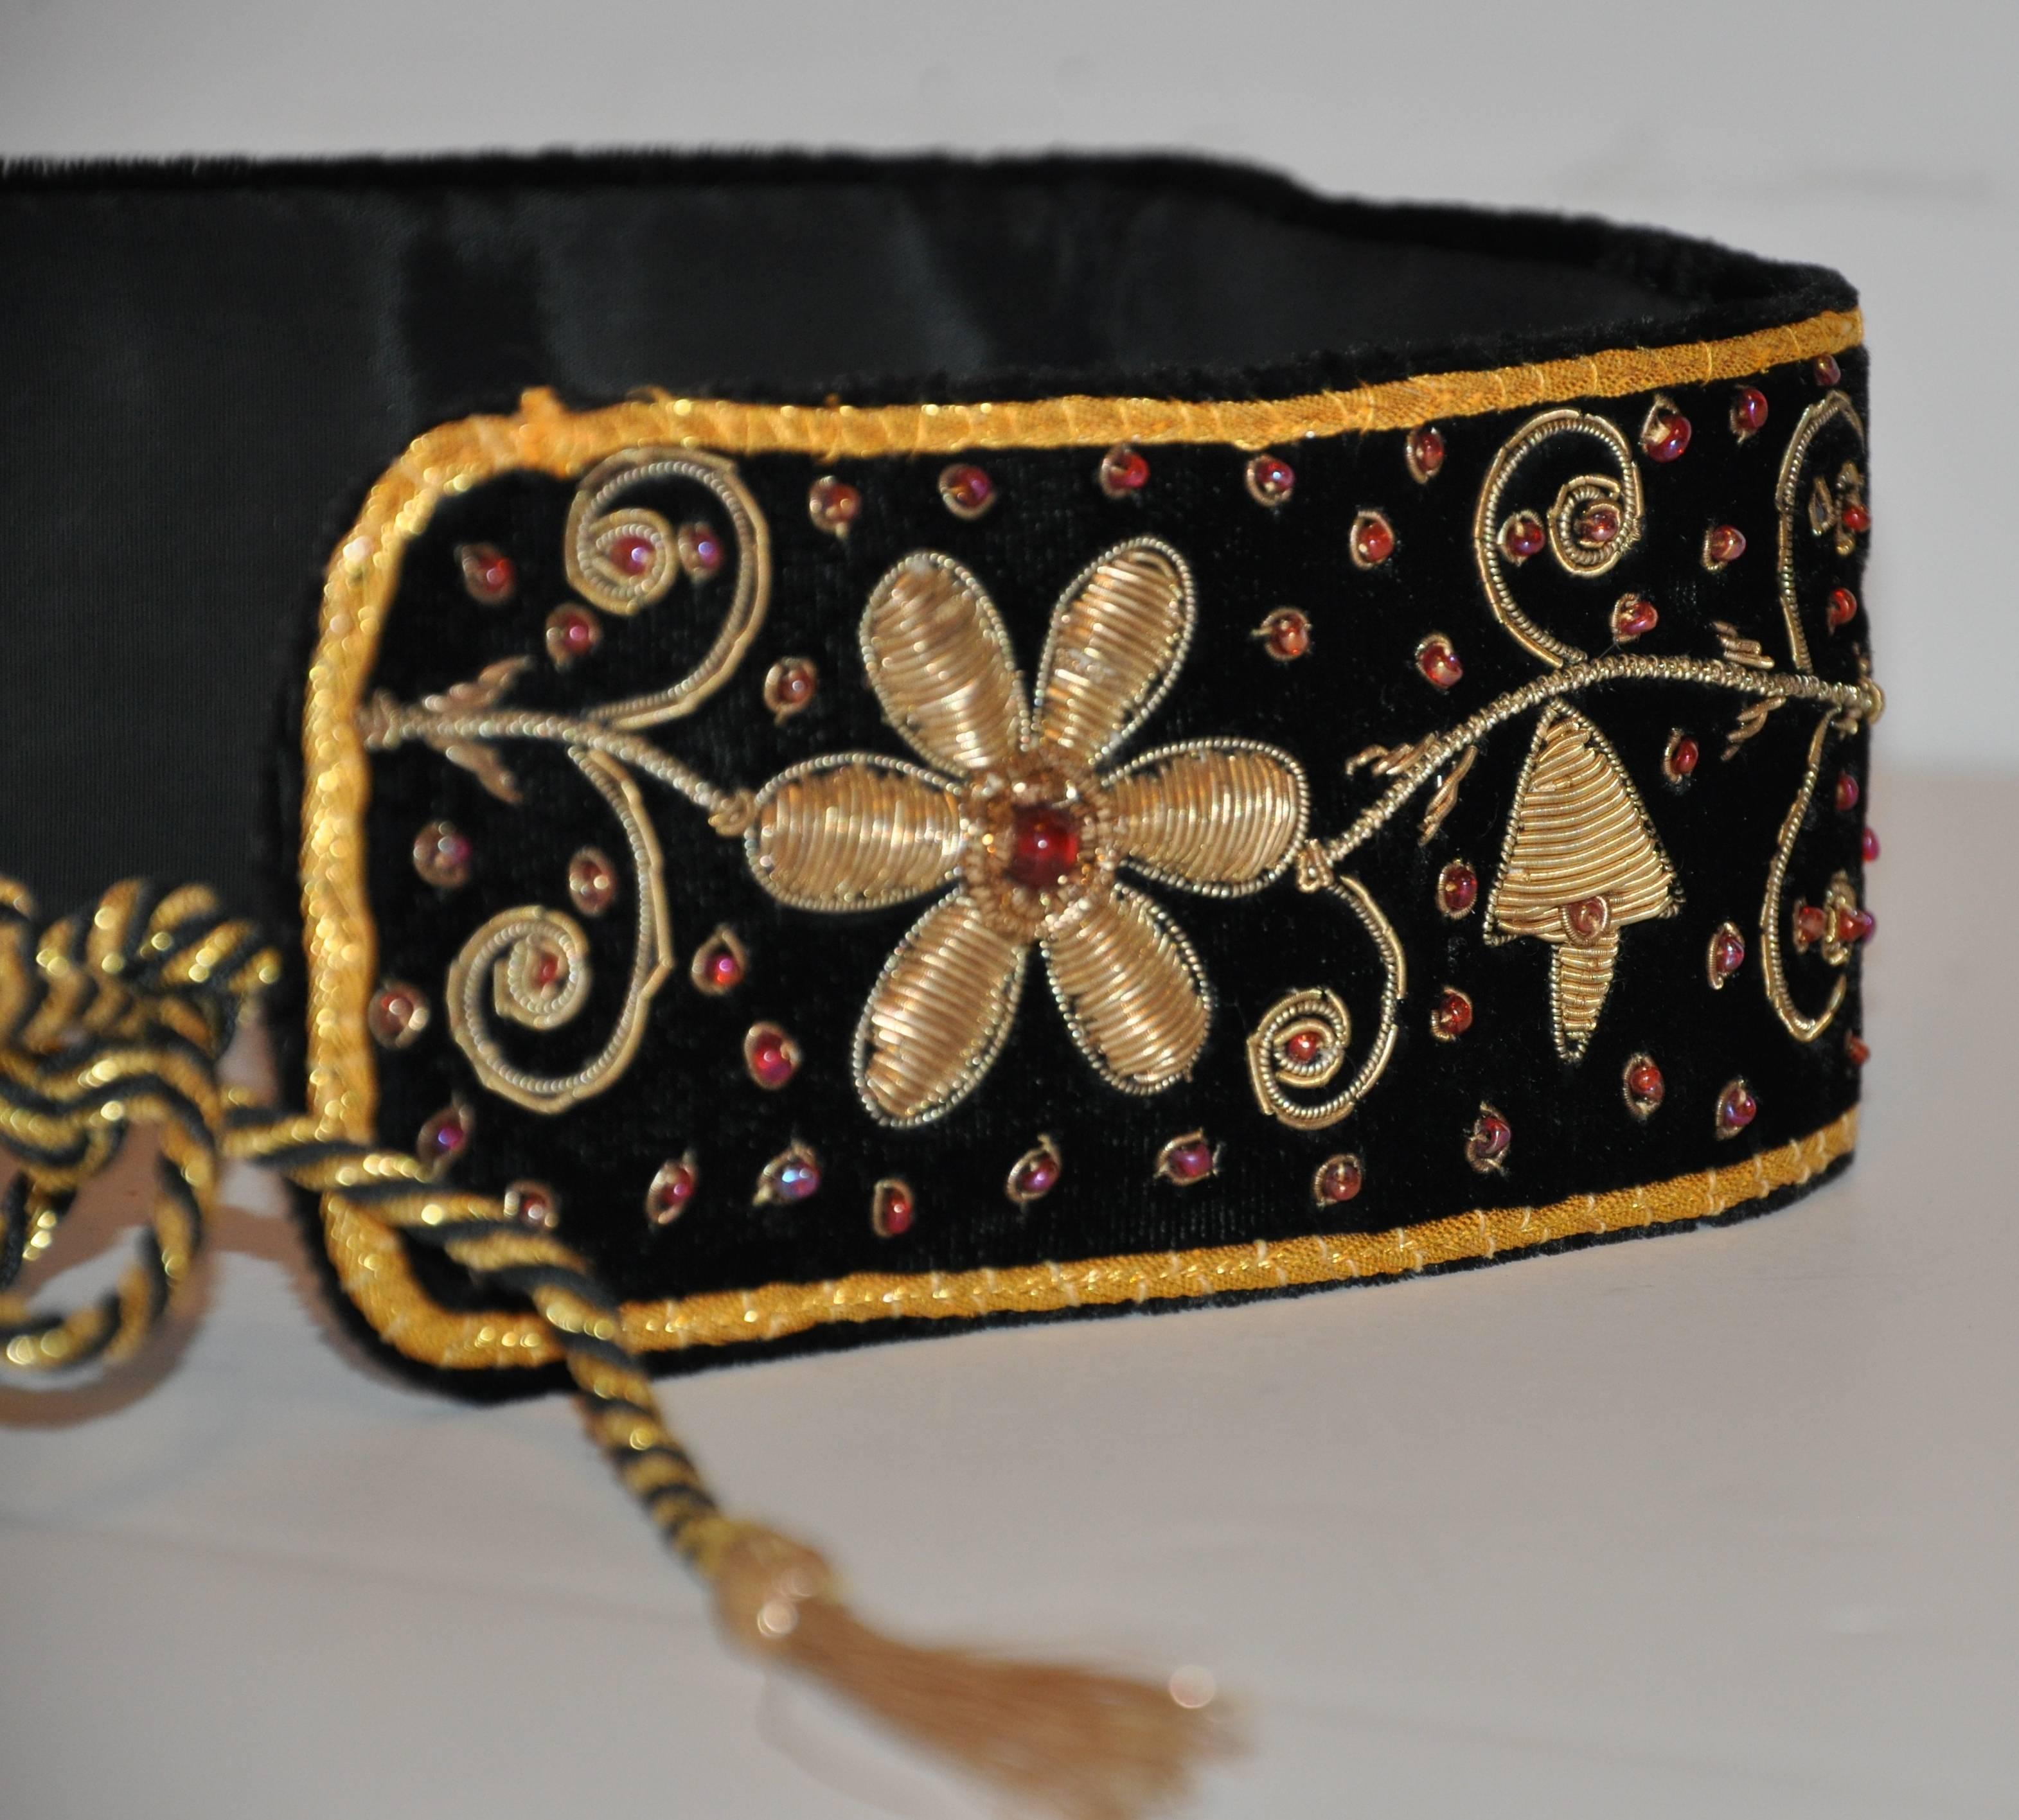        Mary McFadden wonderfully hand-made elegant evening black velvet belt is  detailed in a floral design combining semi-precious stones with gold threading. The edges are finished with hand-braided gold thread cord as well as with the tie which